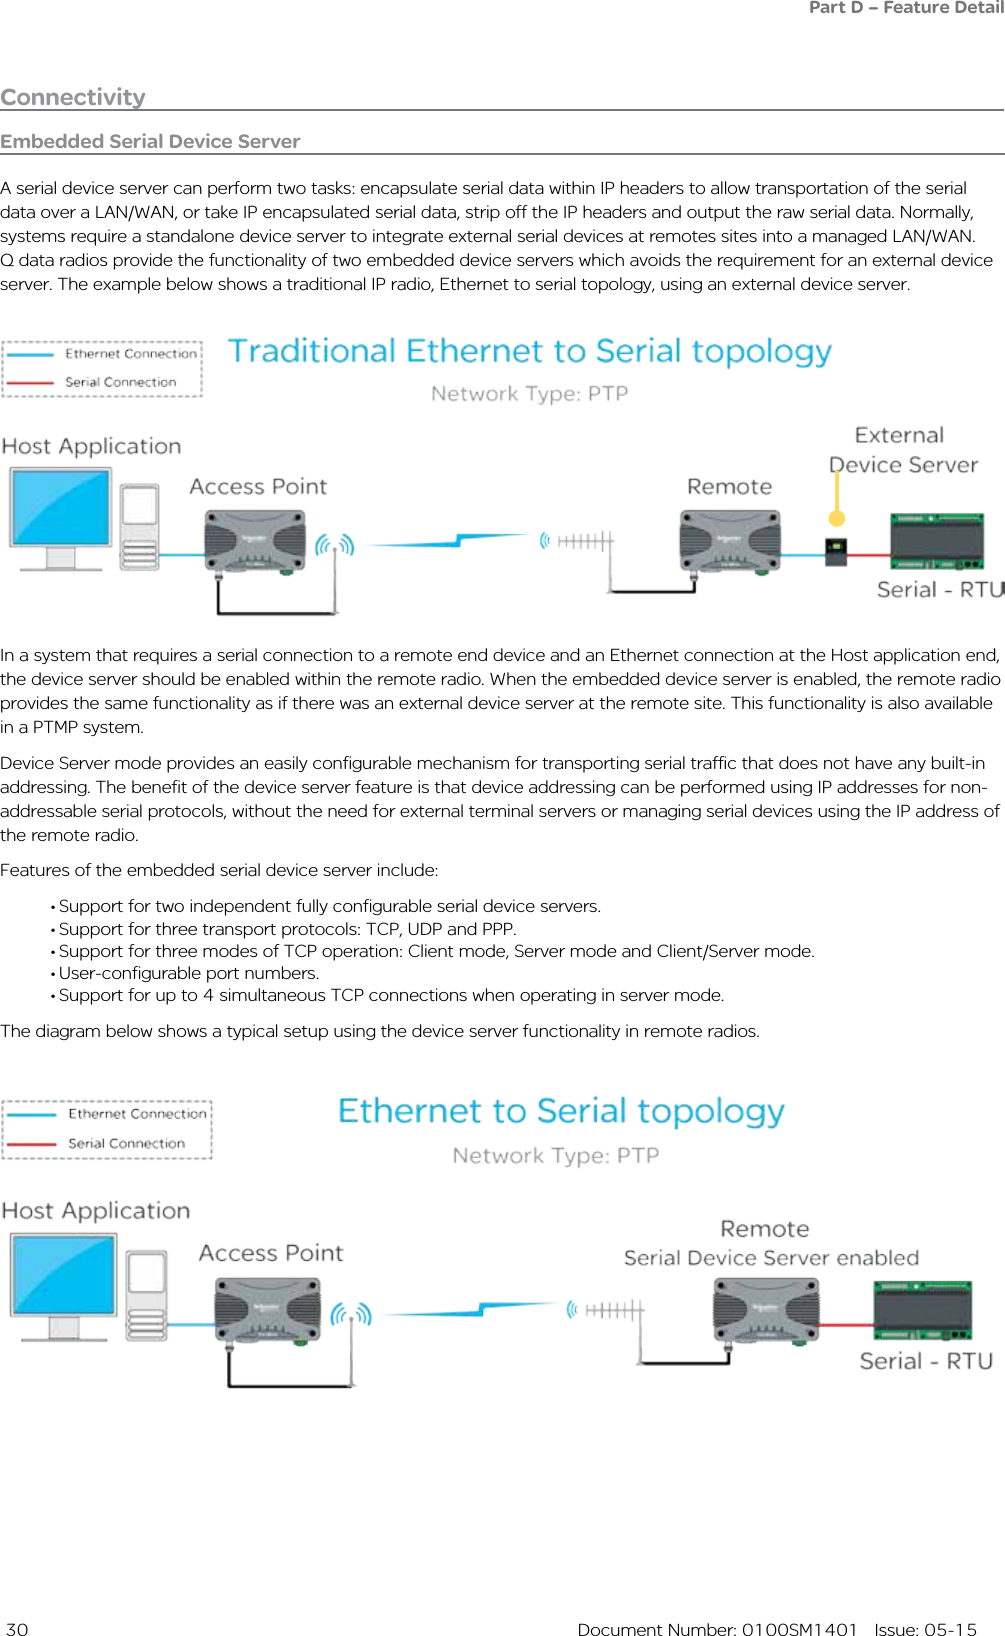  30  Document Number: 0100SM1401   Issue: 05-15ConnectivityEmbedded Serial Device ServerA serial device server can perform two tasks: encapsulate serial data within IP headers to allow transportation of the serial data over a LAN/WAN, or take IP encapsulated serial data, strip off the IP headers and output the raw serial data. Normally, systems require a standalone device server to integrate external serial devices at remotes sites into a managed LAN/WAN. Q data radios provide the functionality of two embedded device servers which avoids the requirement for an external device server. The example below shows a traditional IP radio, Ethernet to serial topology, using an external device server.In a system that requires a serial connection to a remote end device and an Ethernet connection at the Host application end, the device server should be enabled within the remote radio. When the embedded device server is enabled, the remote radio provides the same functionality as if there was an external device server at the remote site. This functionality is also available in a PTMP system.Device Server mode provides an easily configurable mechanism for transporting serial traffic that does not have any built-in addressing. The benefit of the device server feature is that device addressing can be performed using IP addresses for non-addressable serial protocols, without the need for external terminal servers or managing serial devices using the IP address of the remote radio. Features of the embedded serial device server include:• Support for two independent fully configurable serial device servers.• Support for three transport protocols: TCP, UDP and PPP.• Support for three modes of TCP operation: Client mode, Server mode and Client/Server mode.• User-configurable port numbers.• Support for up to 4 simultaneous TCP connections when operating in server mode.The diagram below shows a typical setup using the device server functionality in remote radios. Part D – Feature Detail